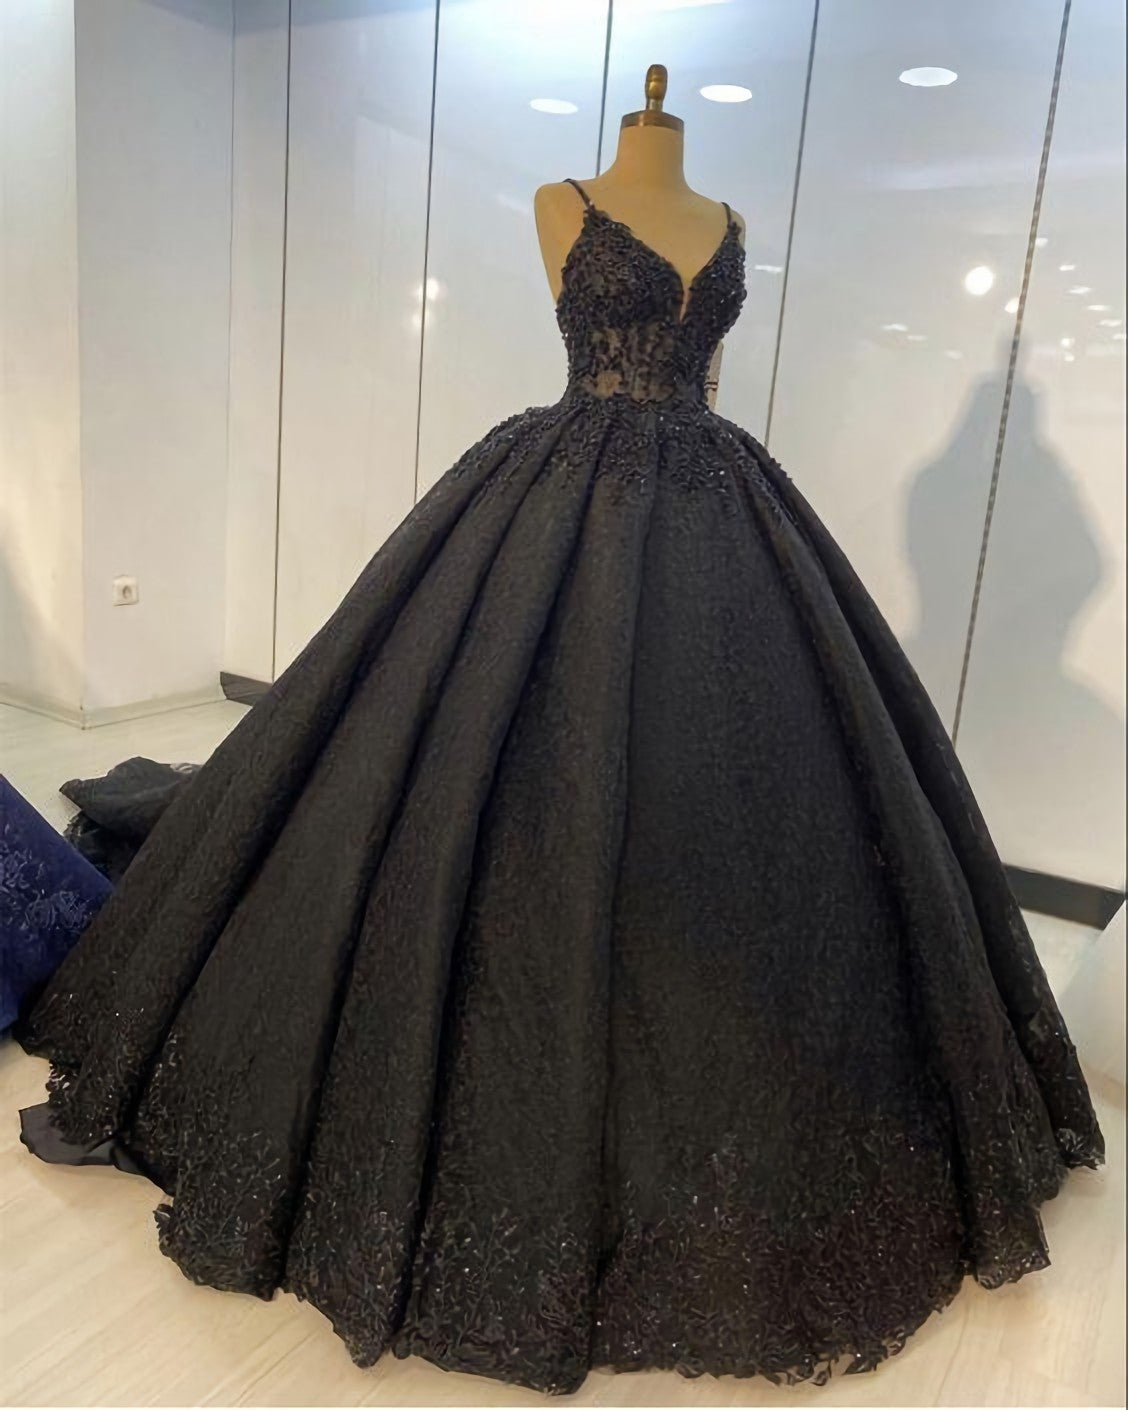 Wedding Dresse Styles, Black Lace Ball Gown Dresses, For Wedding Prom Evening Gown